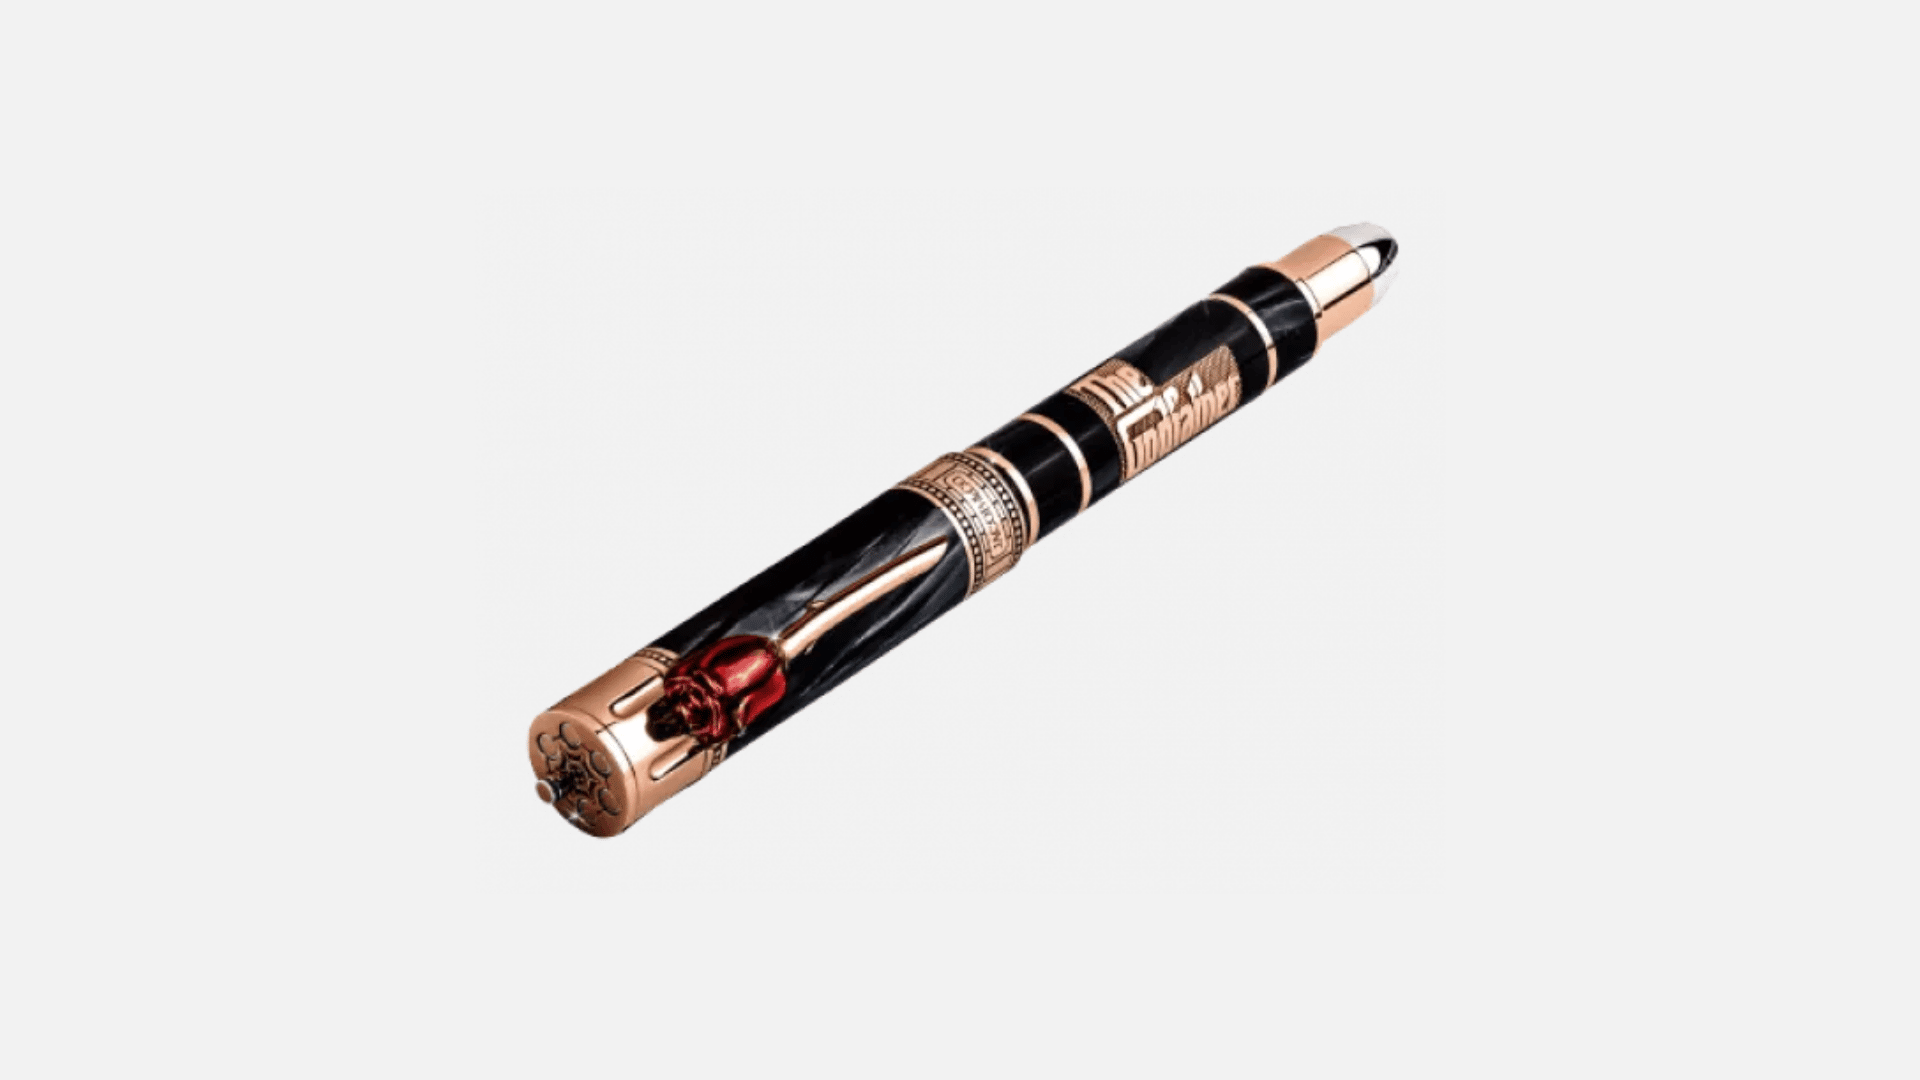 "The Godfather" Pen By Jacob & Co.